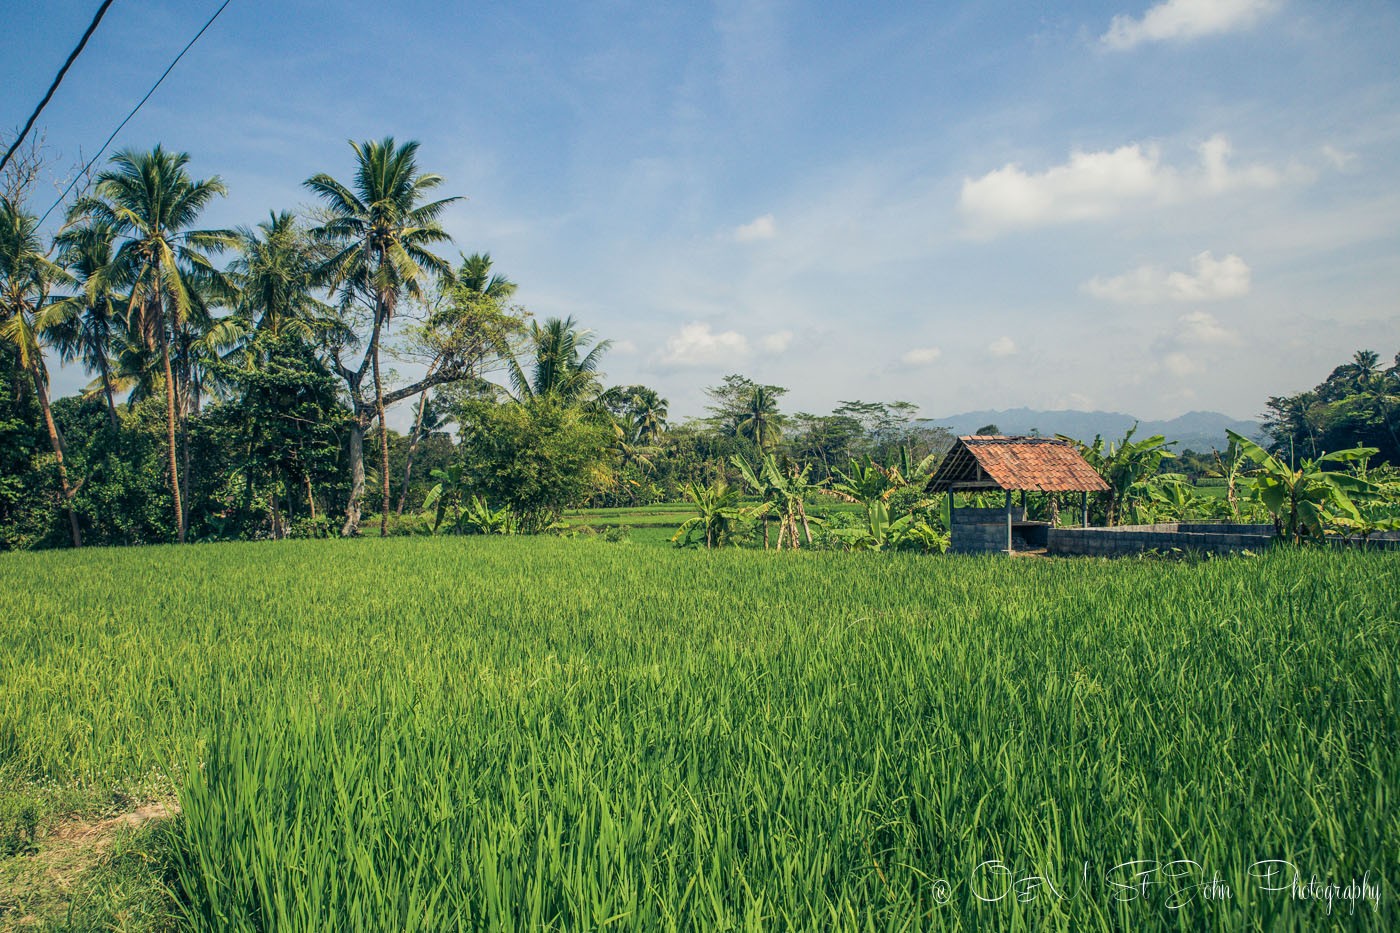 Rice fields in Java countryside. Indonesia